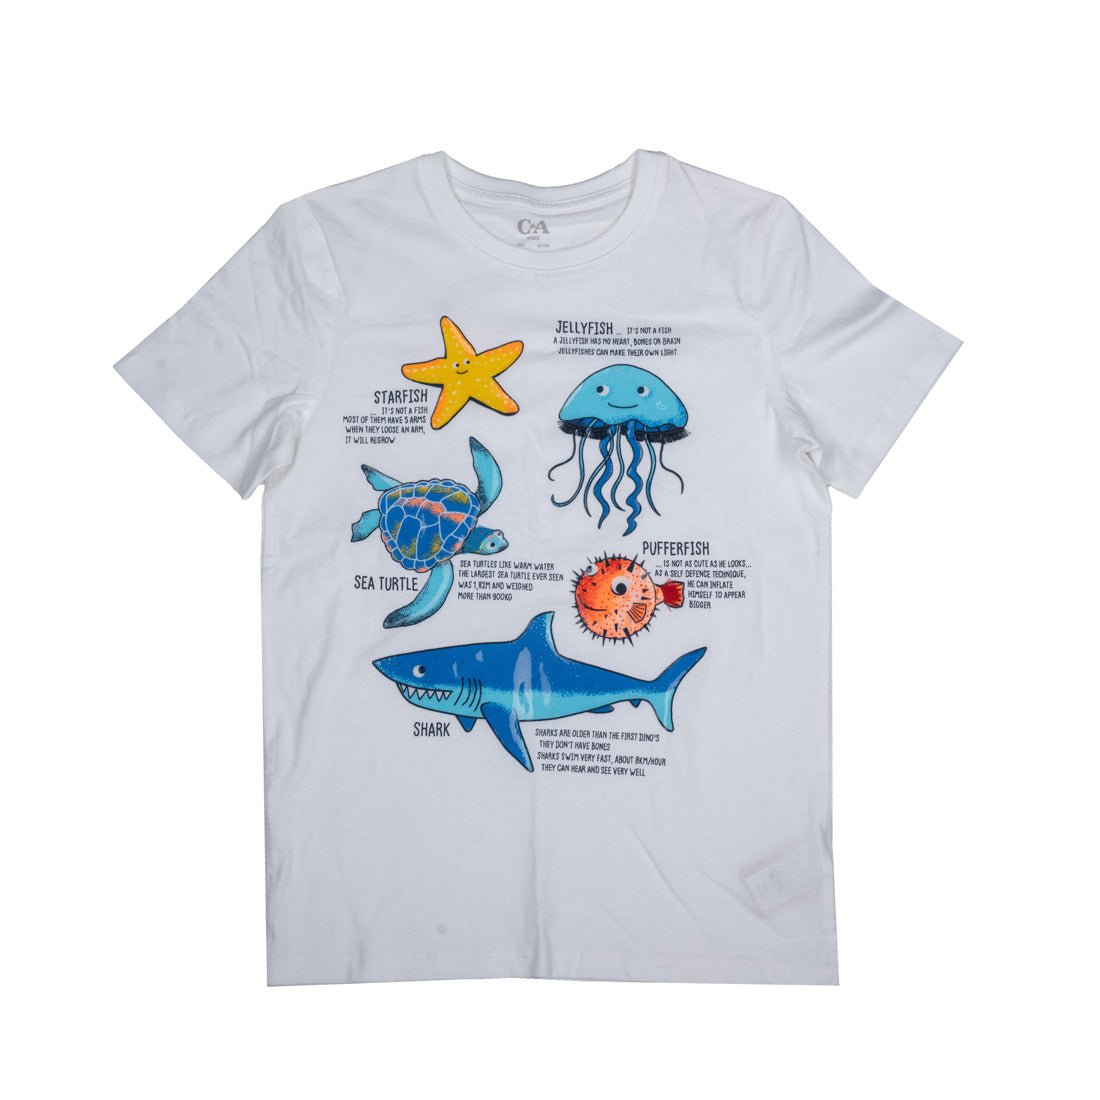 C&A Brand New T-shirt For Boys - mymadstore.com